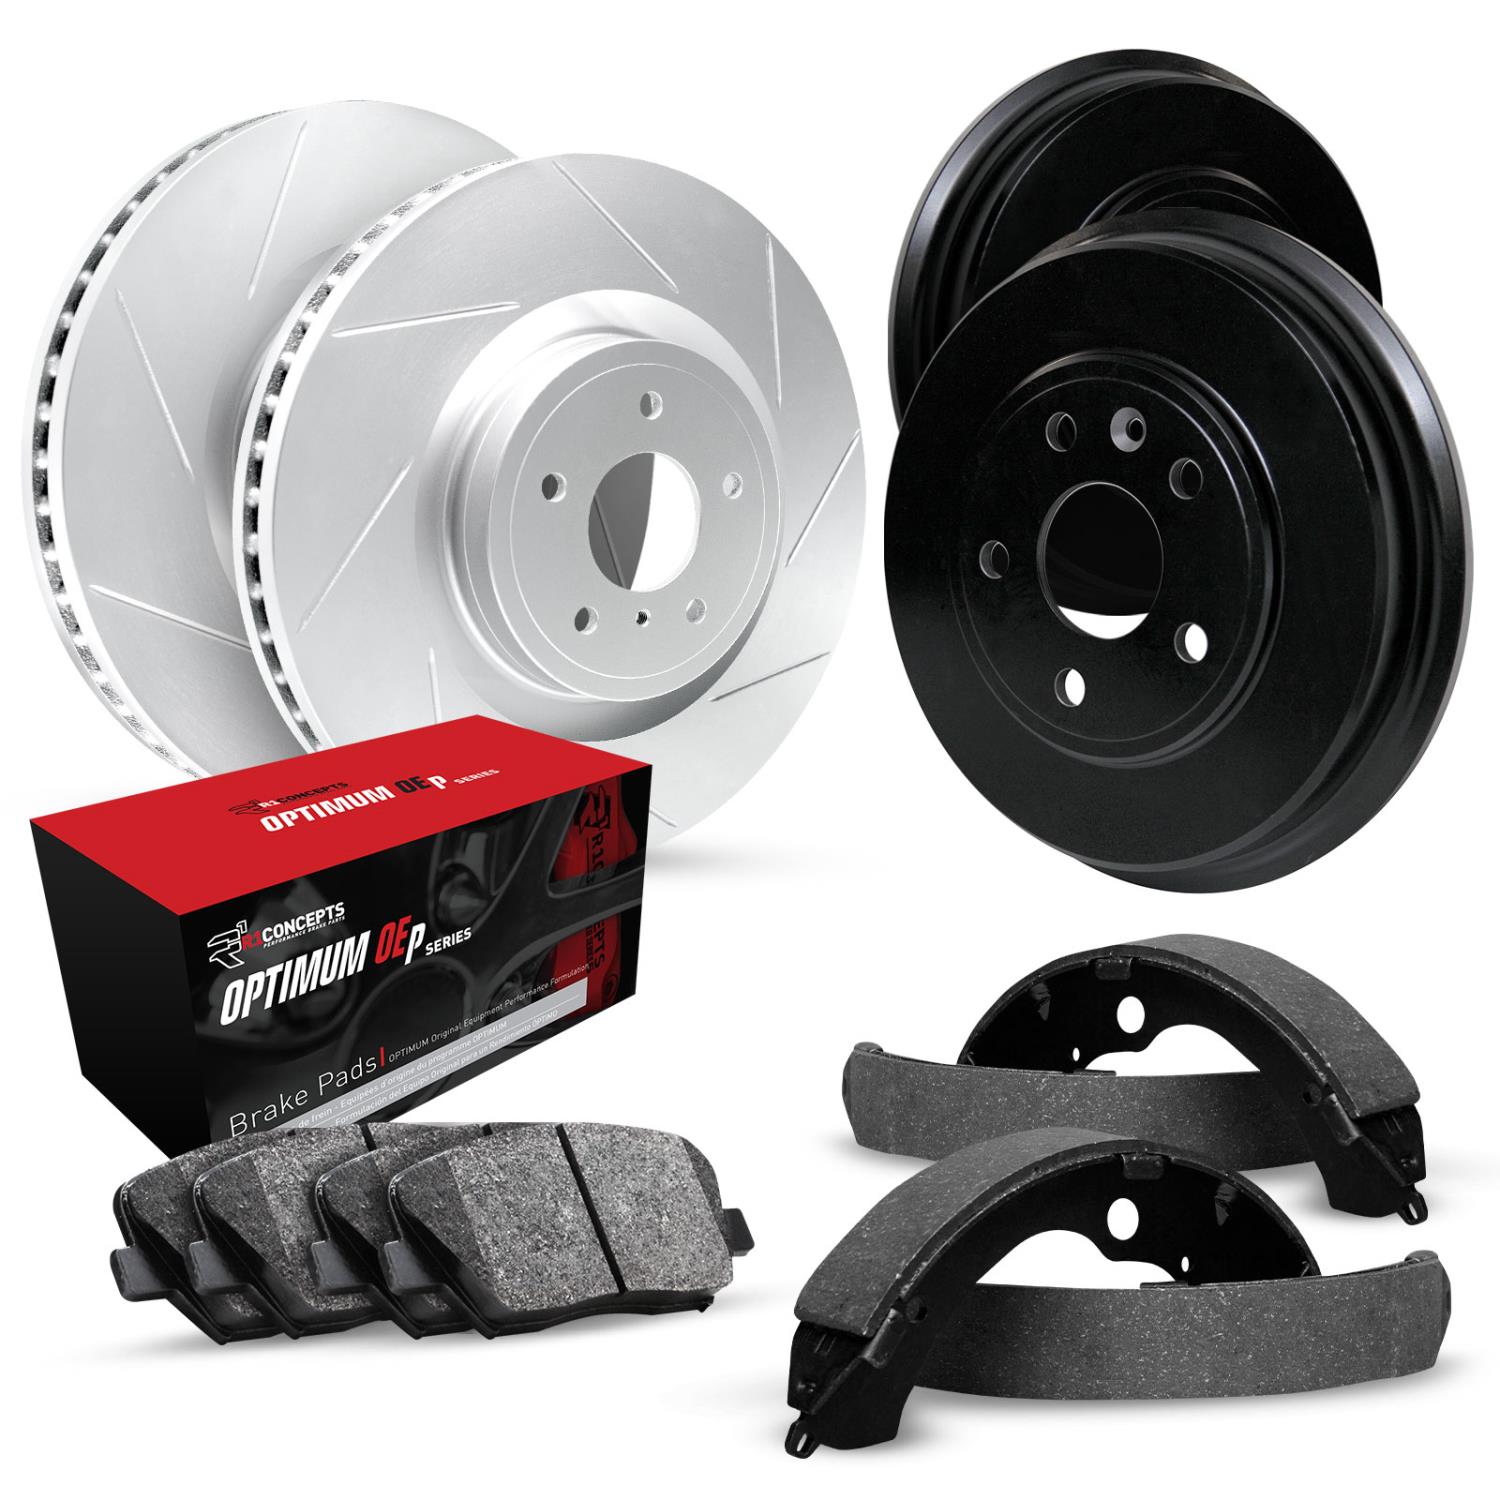 GEO-Carbon Slotted Brake Rotor & Drum Set w/Optimum OE Pads & Shoes, 1990-1991 Acura/Honda, Position: Front & Rear